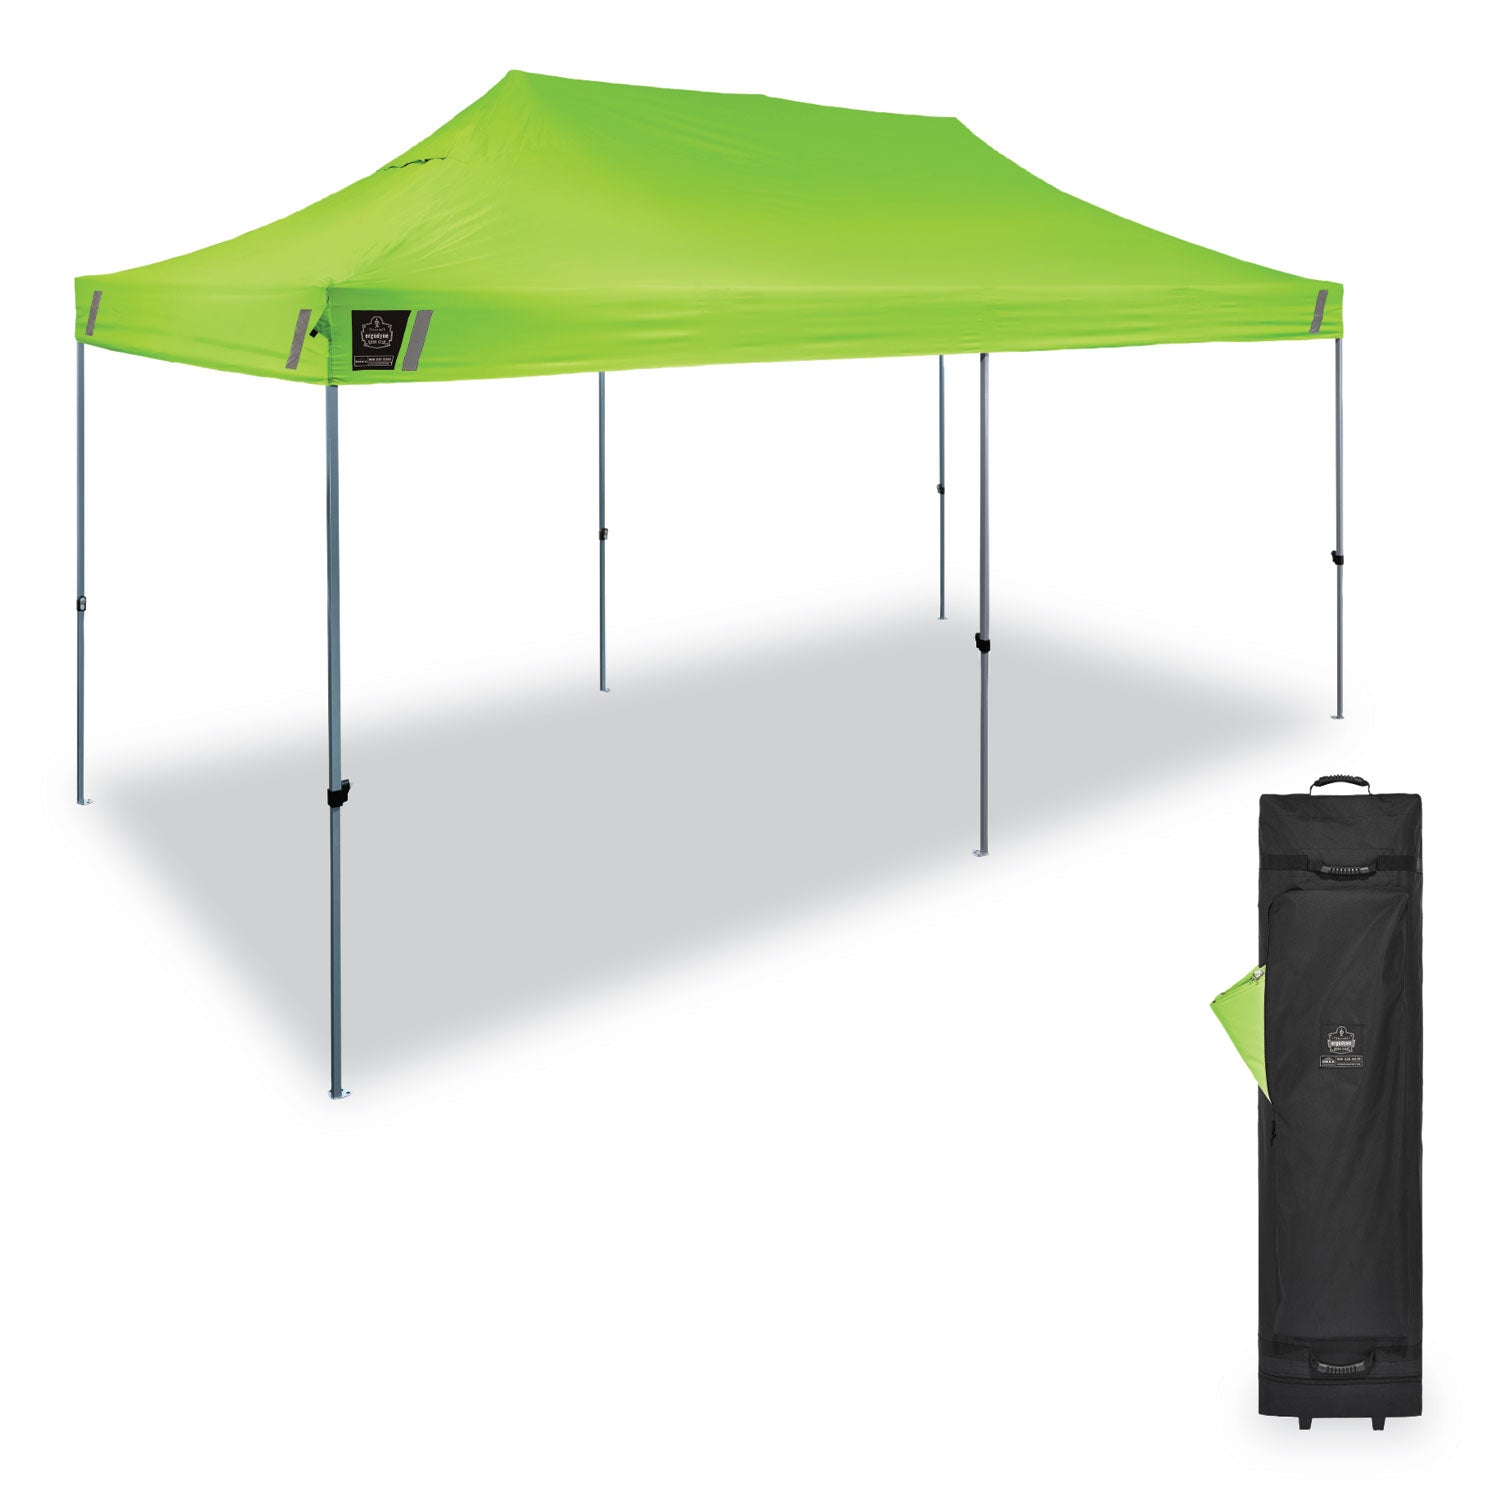 shax-6015-heavy-duty-pop-up-tent-single-skin-10-ft-x-20-ft-polyester-steel-lime-ships-in-1-3-business-days_ego12915 - 1